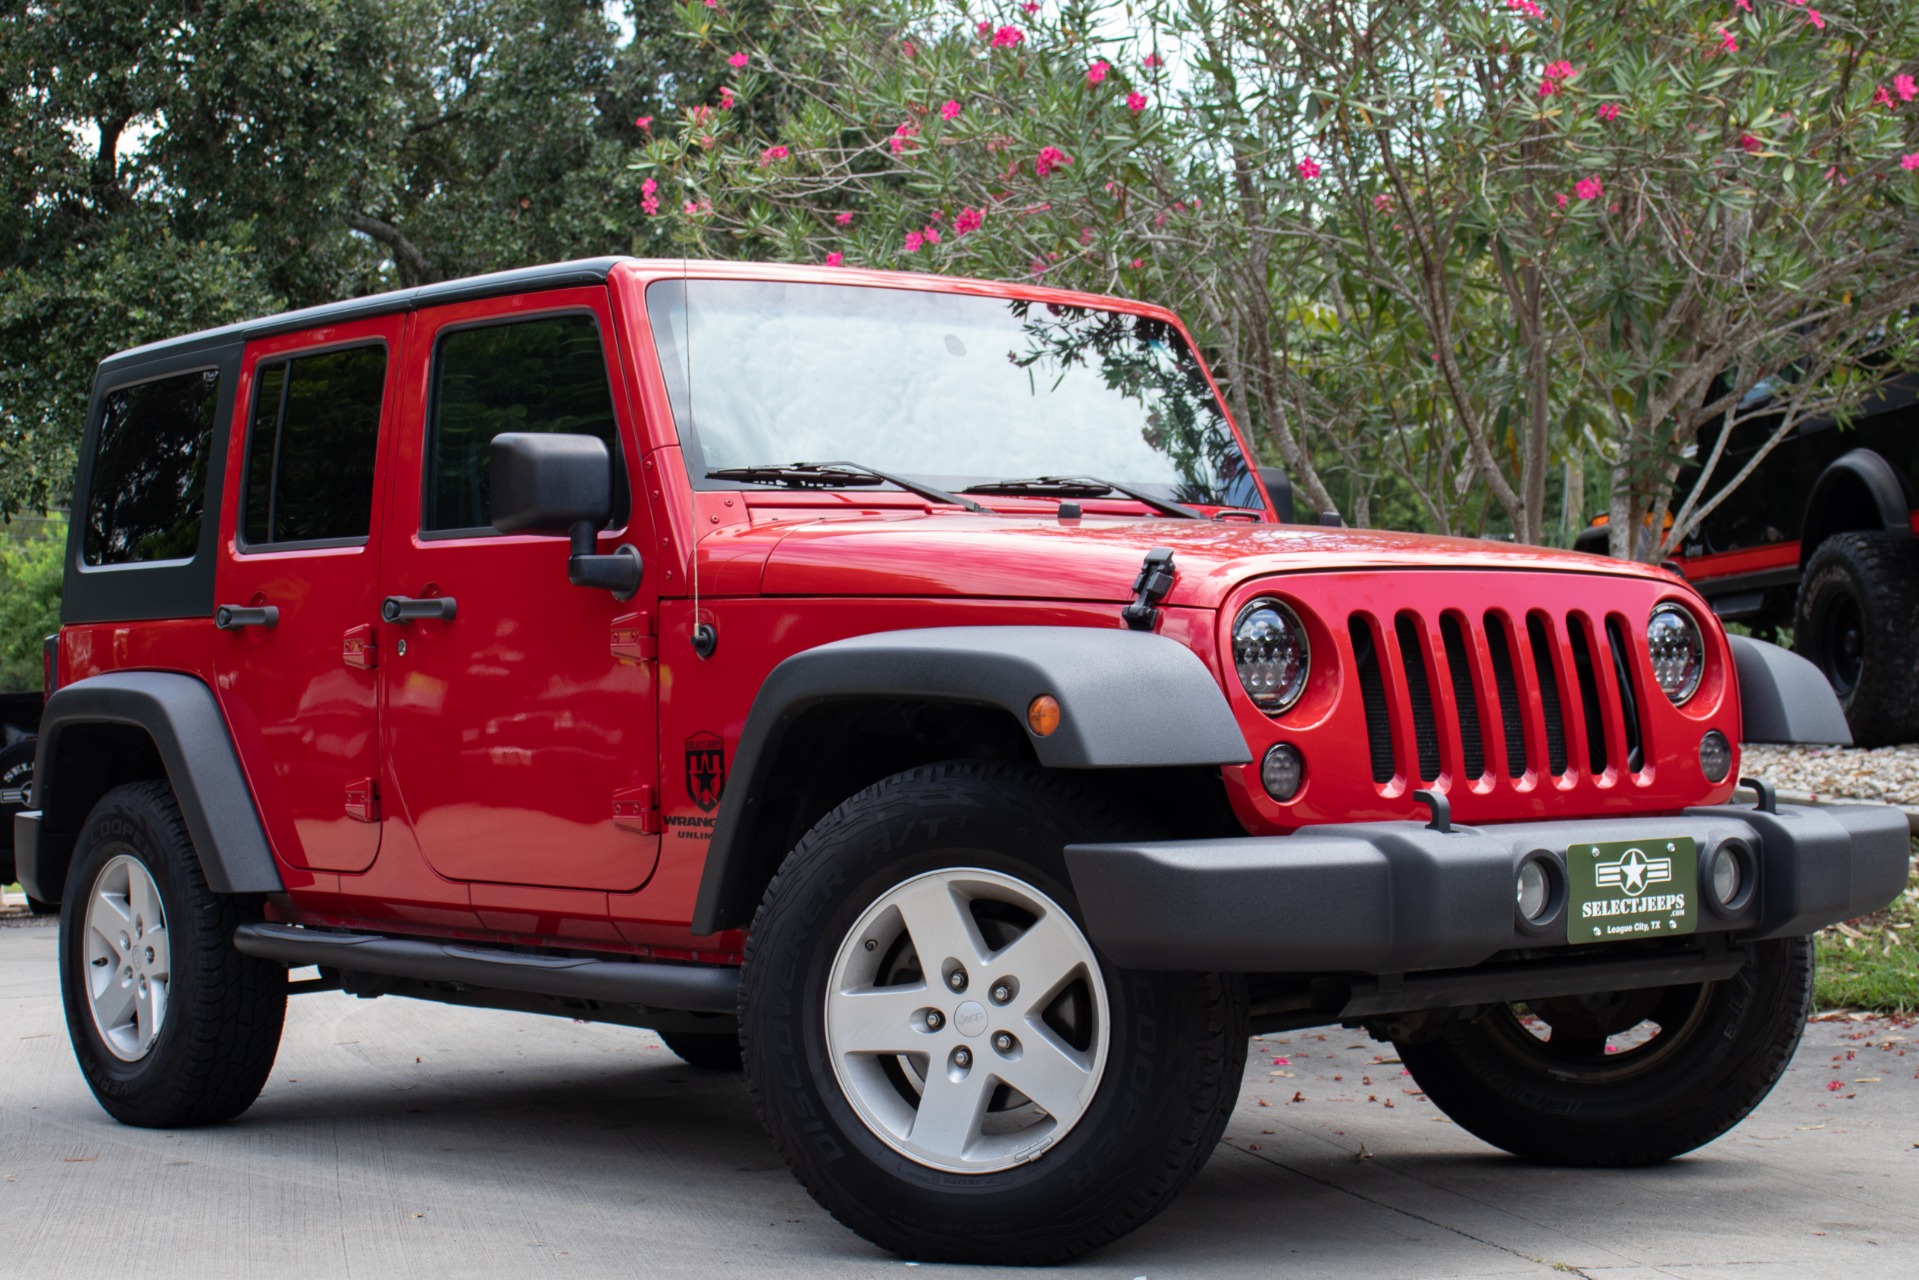 Used 2008 Jeep Wrangler Unlimited X For Sale 16 995